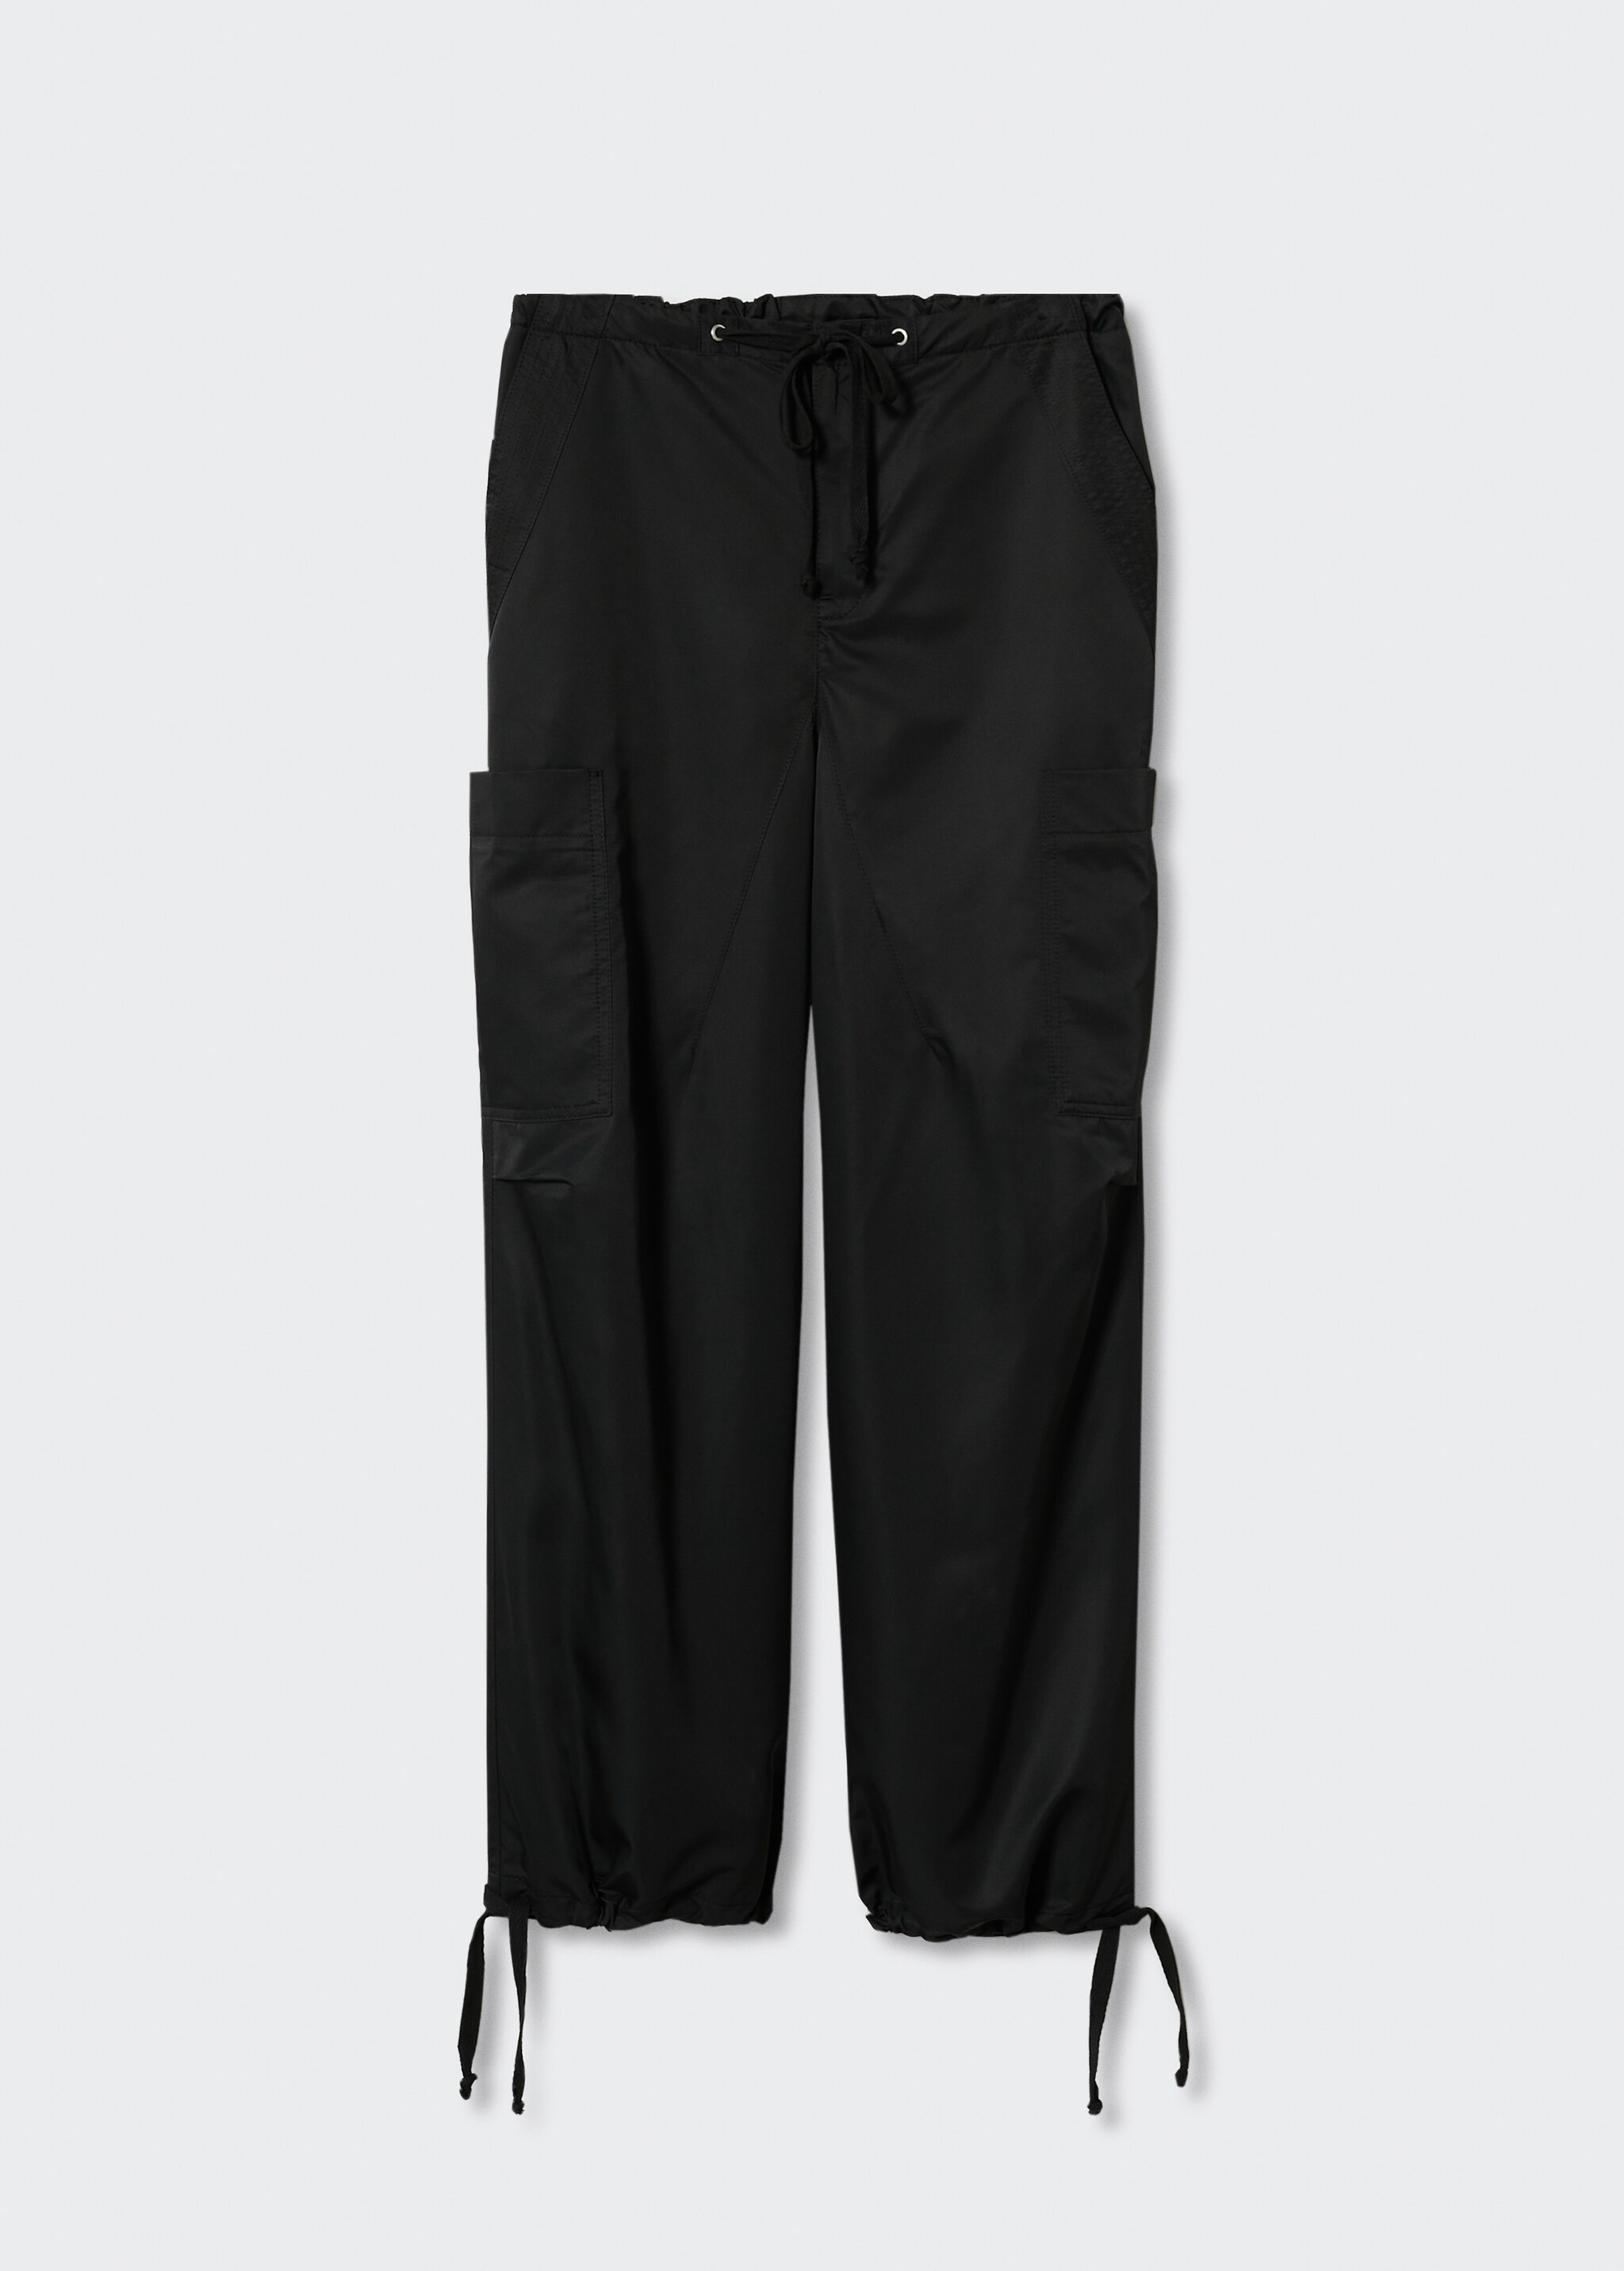 Parachute trousers - Article without model